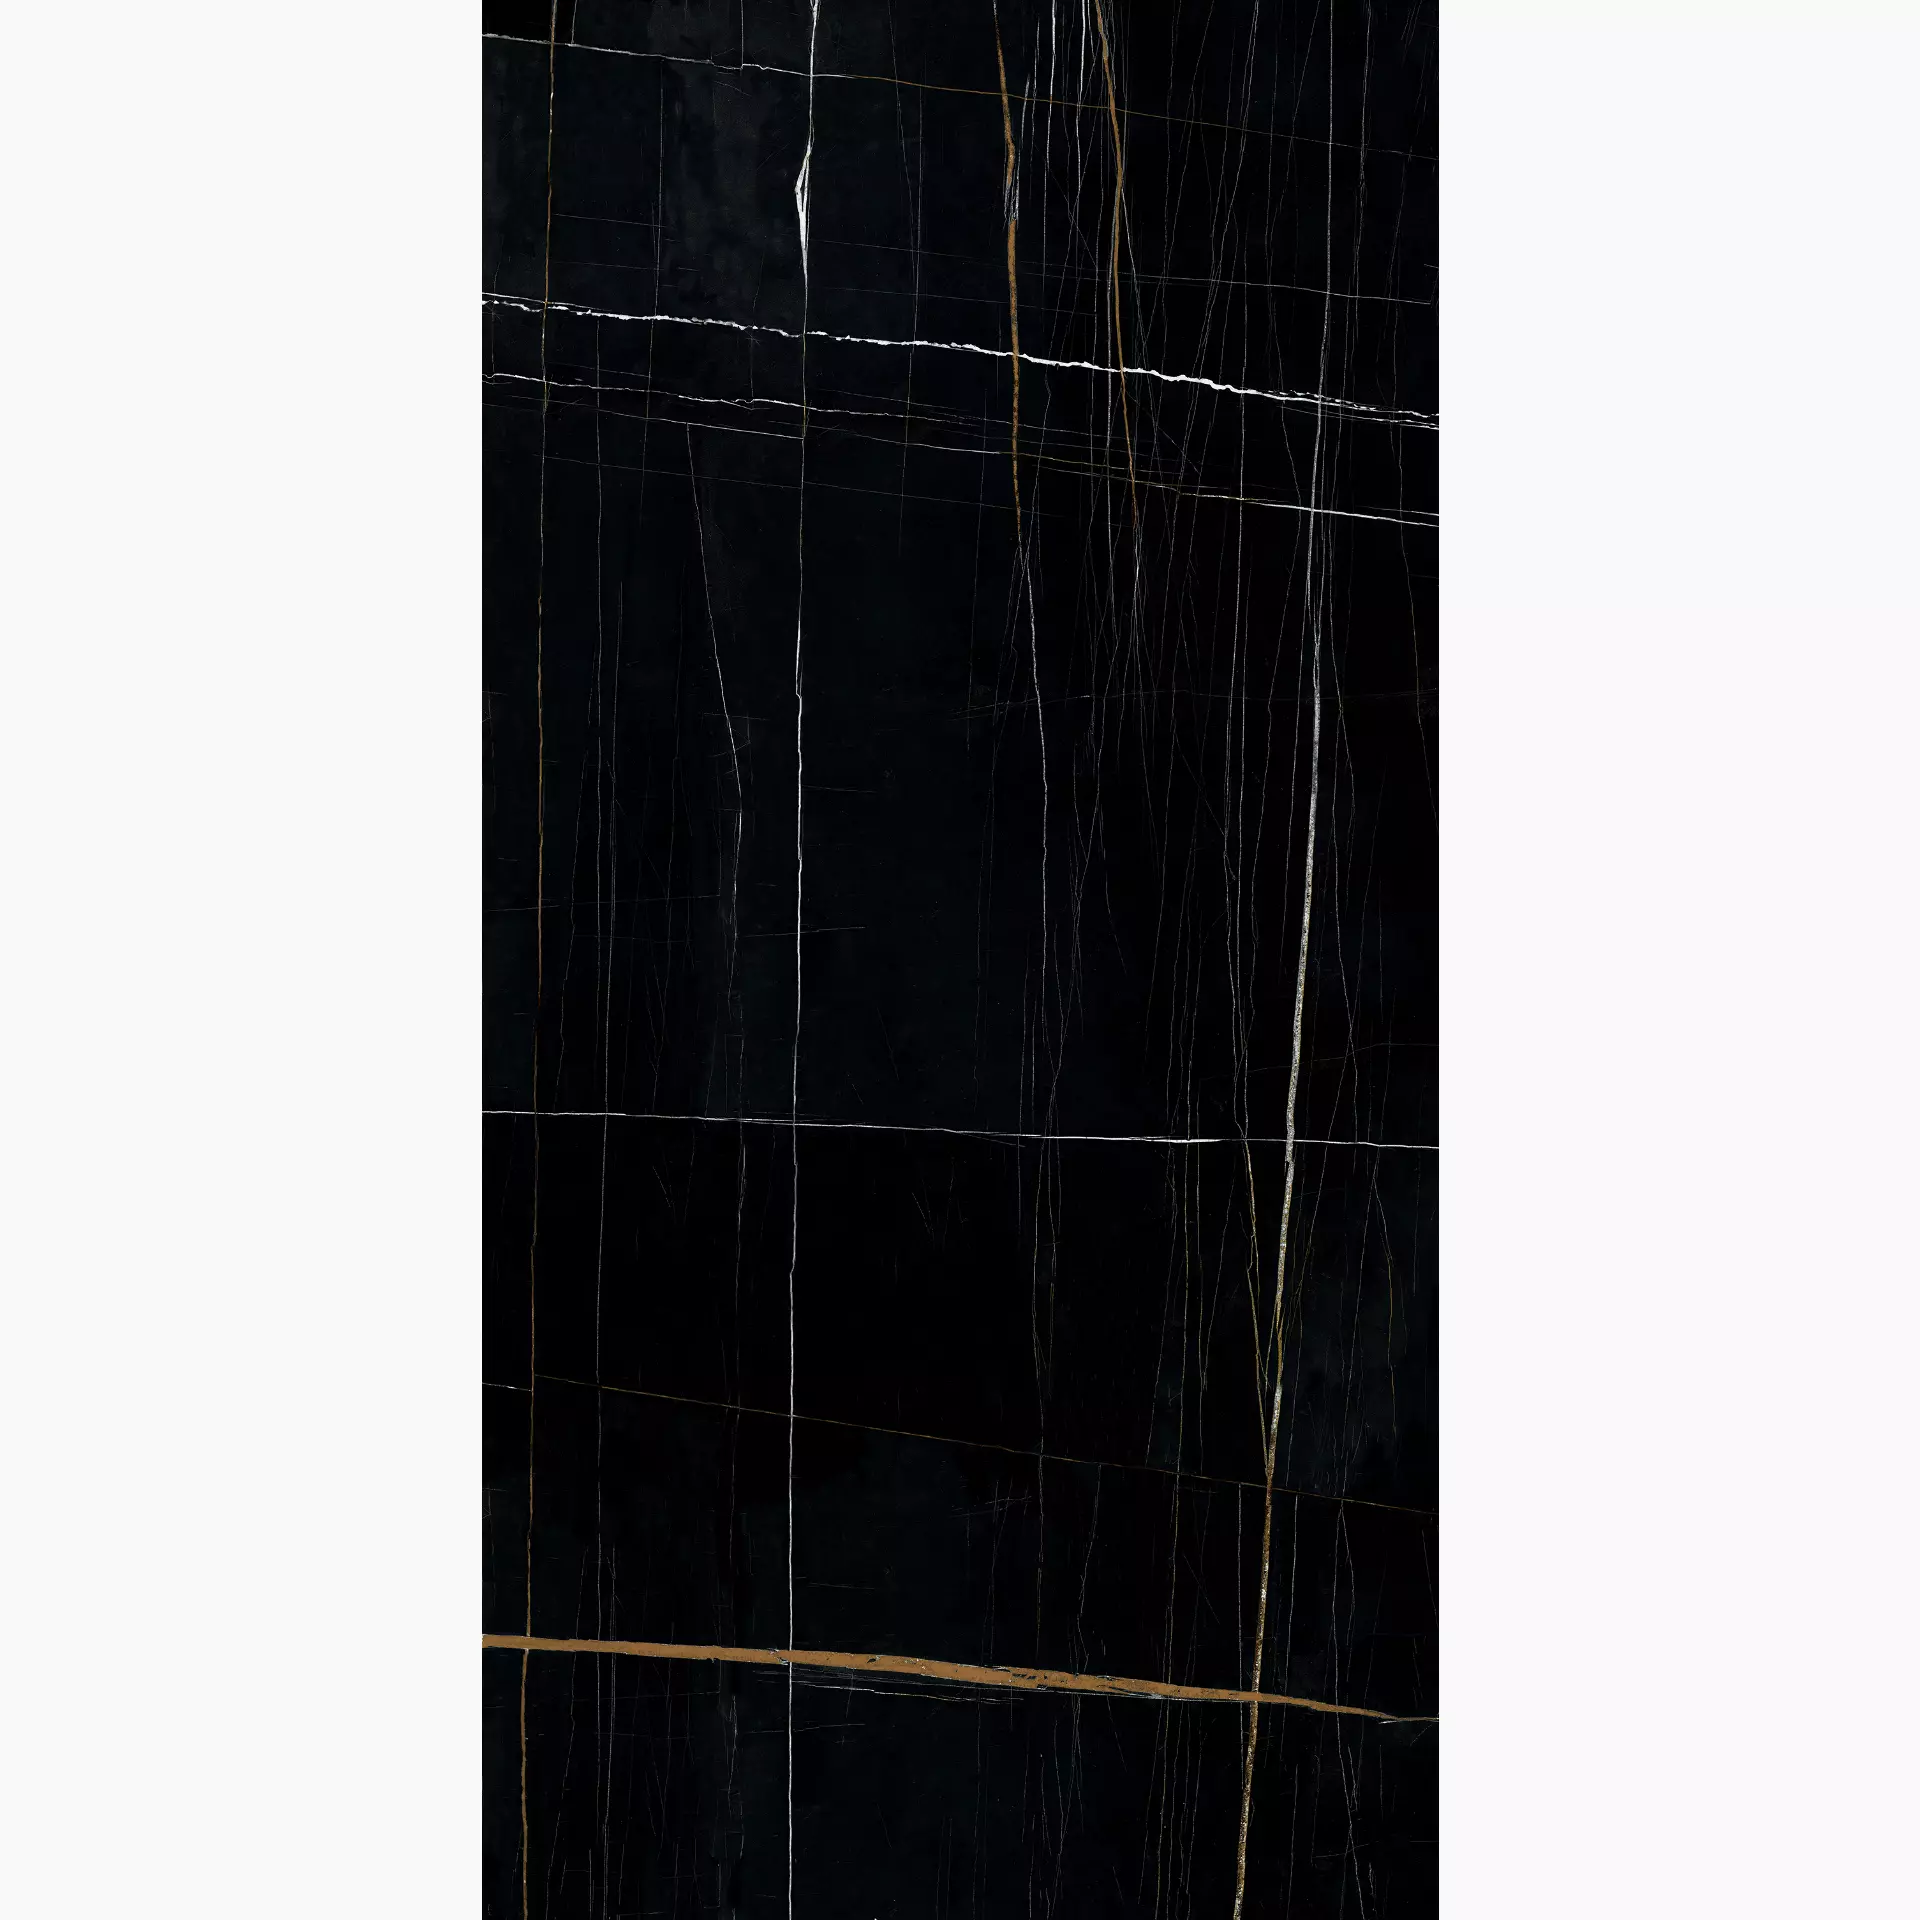 Fondovalle Infinito 2.0 Sahara Noir Glossy INF345 160x320cm rectified 6,5mm